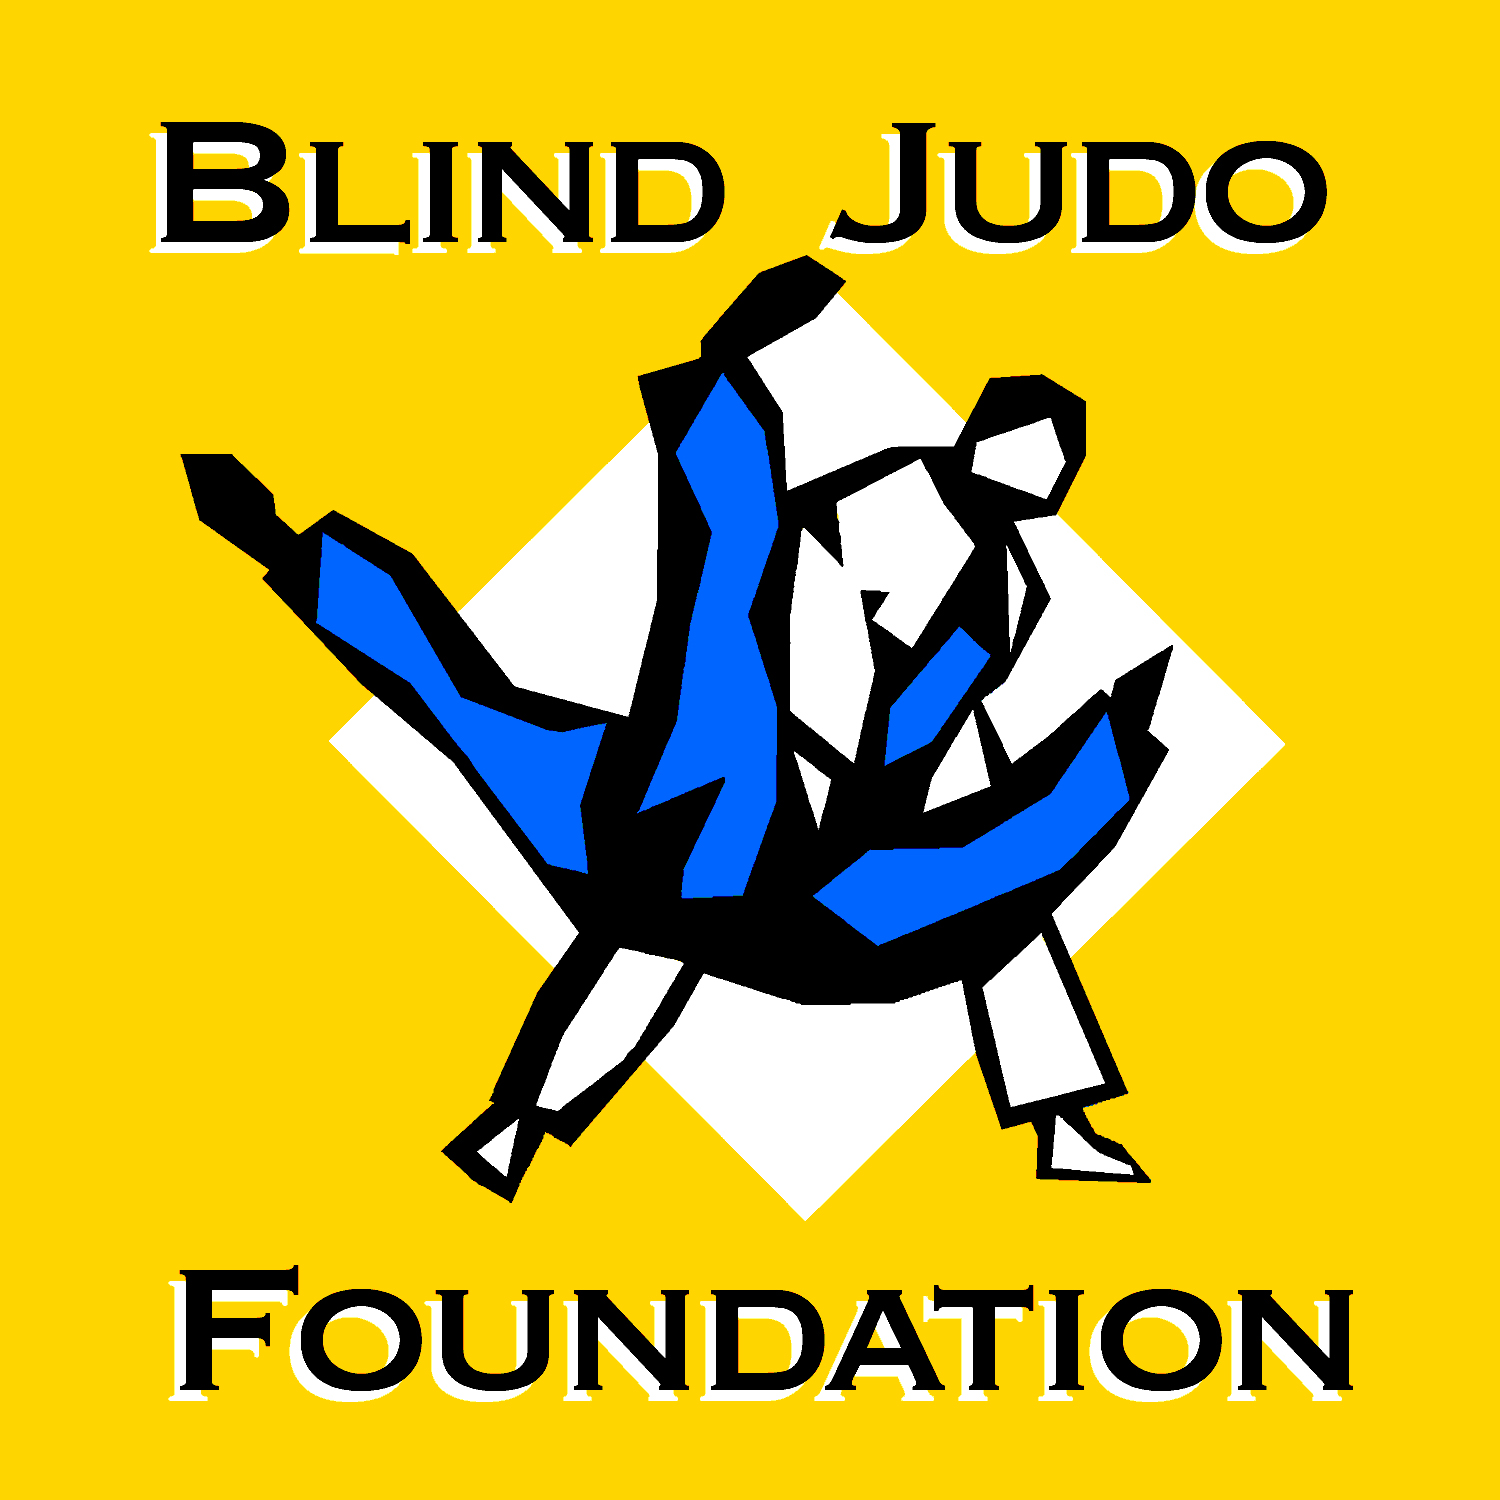 Empowering Blind and Visually Impaired Individuals Through the Sport of Judo